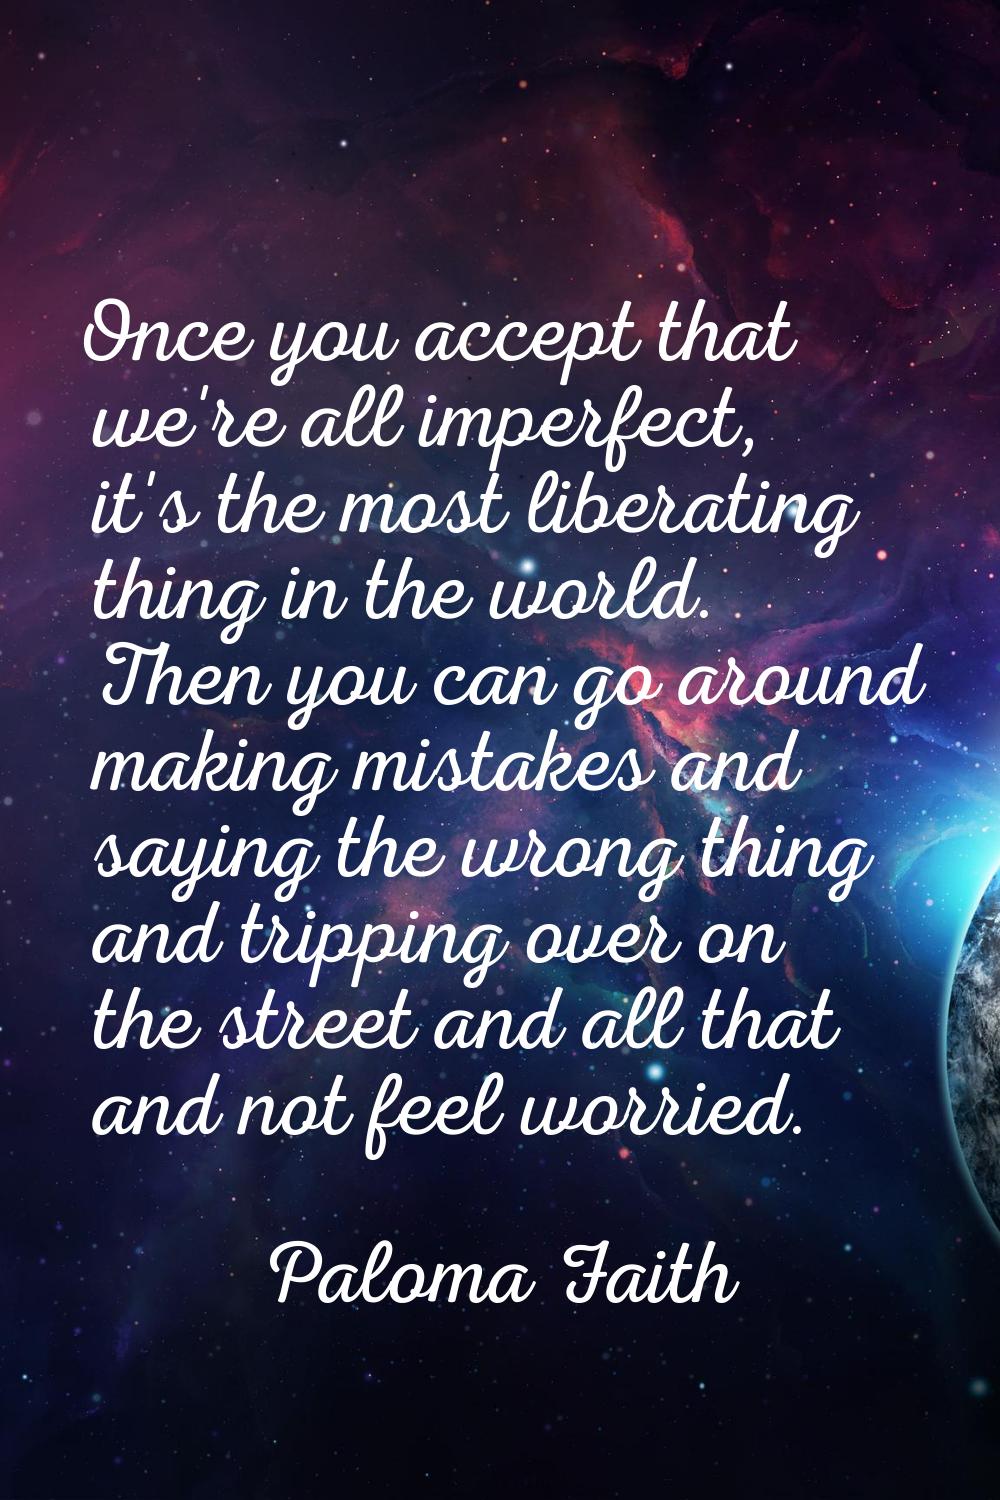 Once you accept that we're all imperfect, it's the most liberating thing in the world. Then you can